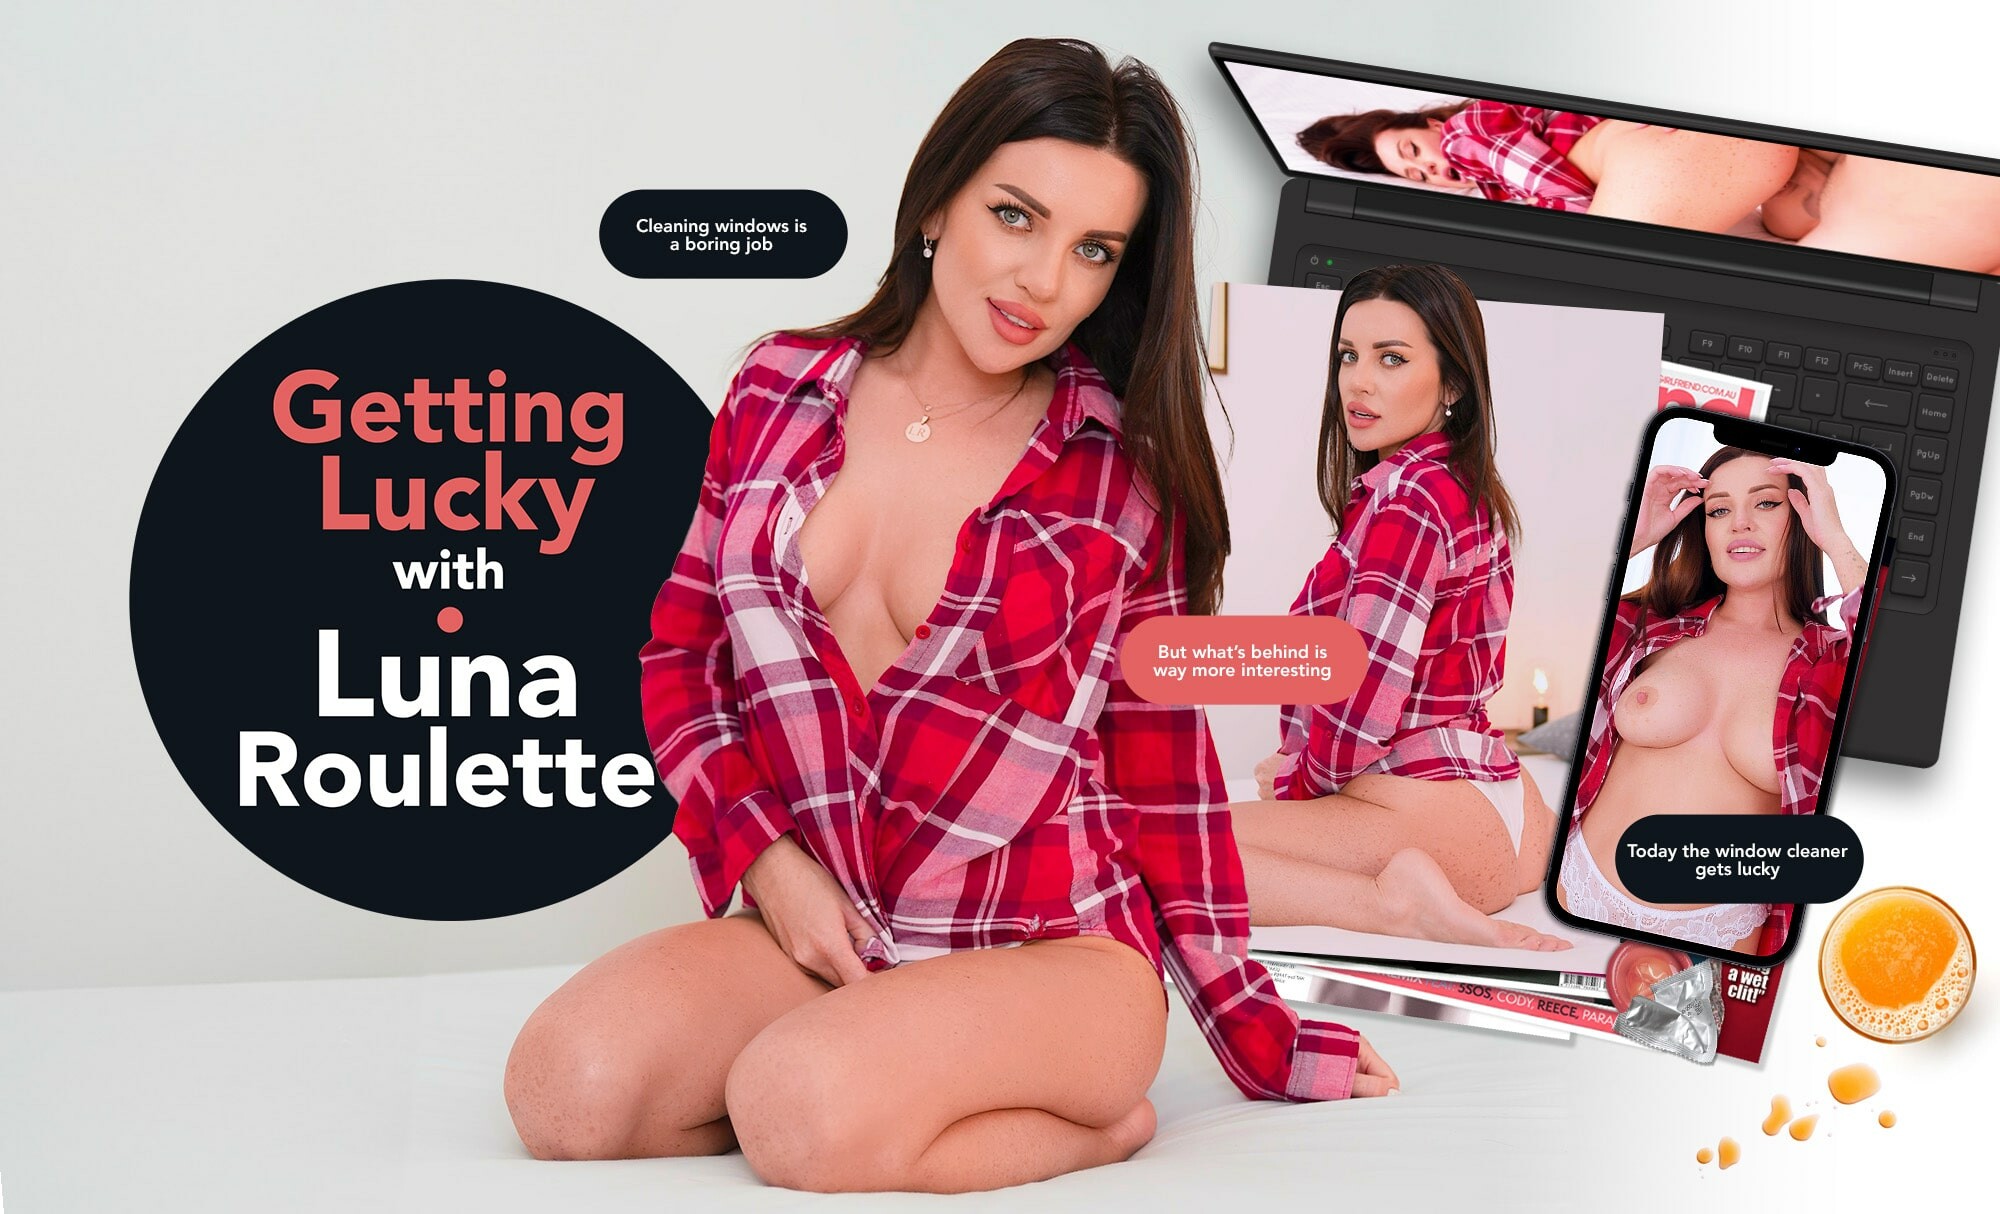 Luna Roulette “Getting Lucky with Luna Roulette” LifeSelector